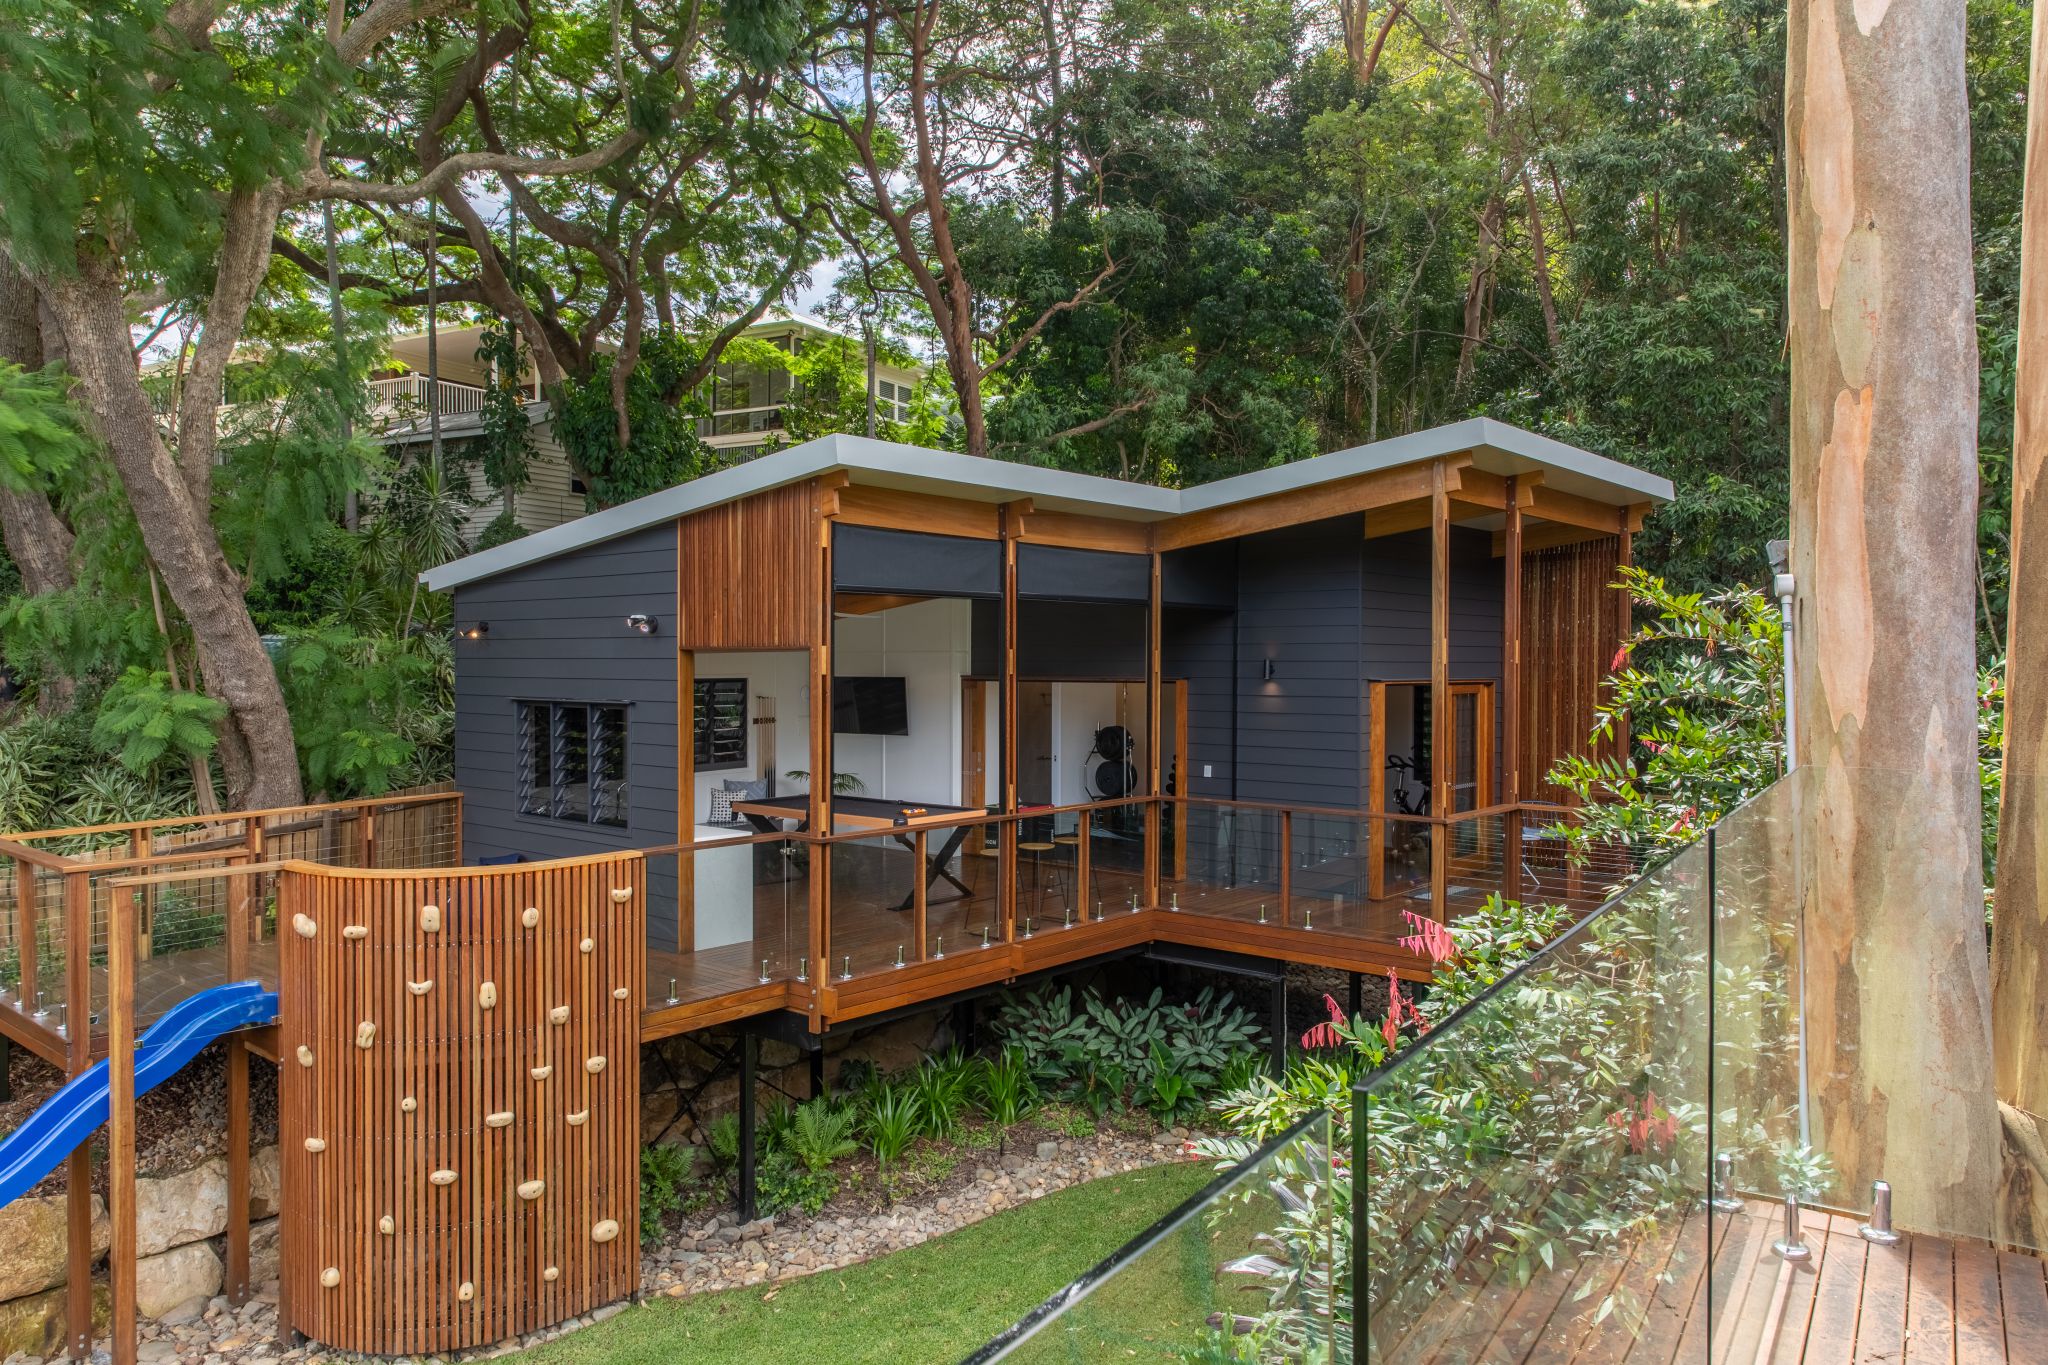 A modern family home set in a lush garden with a spacious backyard featuring a vibrant green lawn. The house is elevated on stilts, with a wooden deck that includes EnduroShield-coated glass railings, offering a clear view of the surrounding nature. A blue slide adds a playful touch, suggesting a child-friendly environment. The architecture displays a mix of dark grey and natural wood finishes, with large windows that allow for an indoor-outdoor living experience. The garden is rich with mature trees and tropical plants, enhancing the home's serene and private atmosphere.